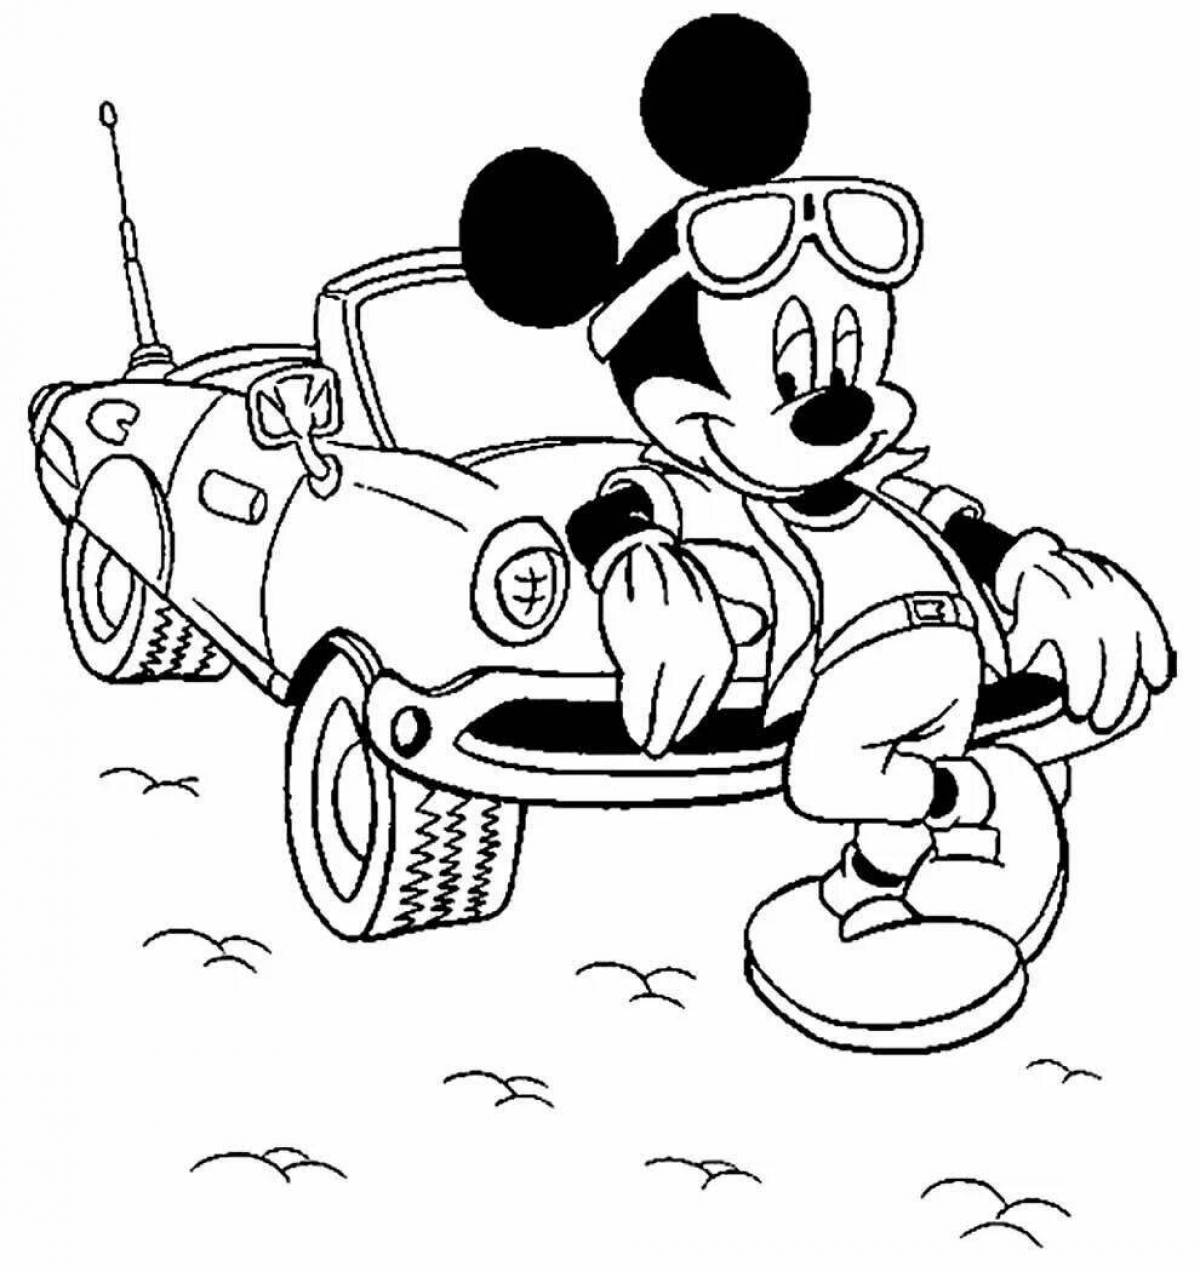 Charming mickey mouse coloring book for boys